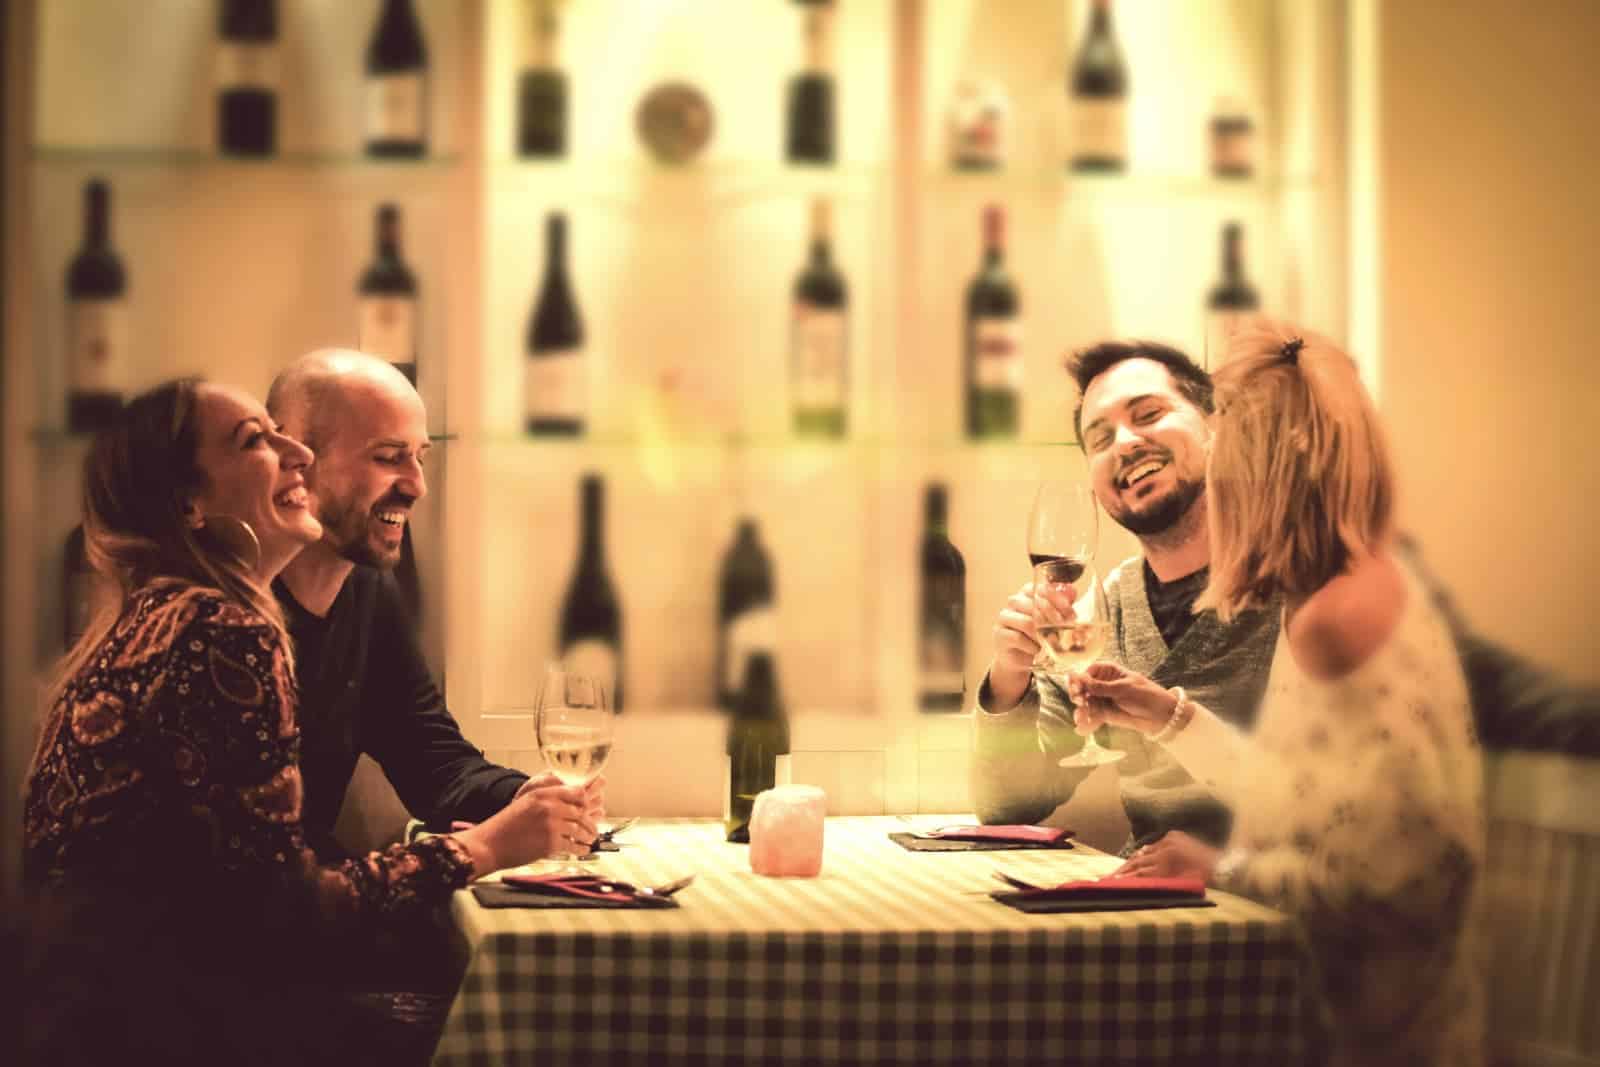 Two couples laughing at a table in a restaurant. All are holding wine glasses and the wall in the background is full of shelves of wine.